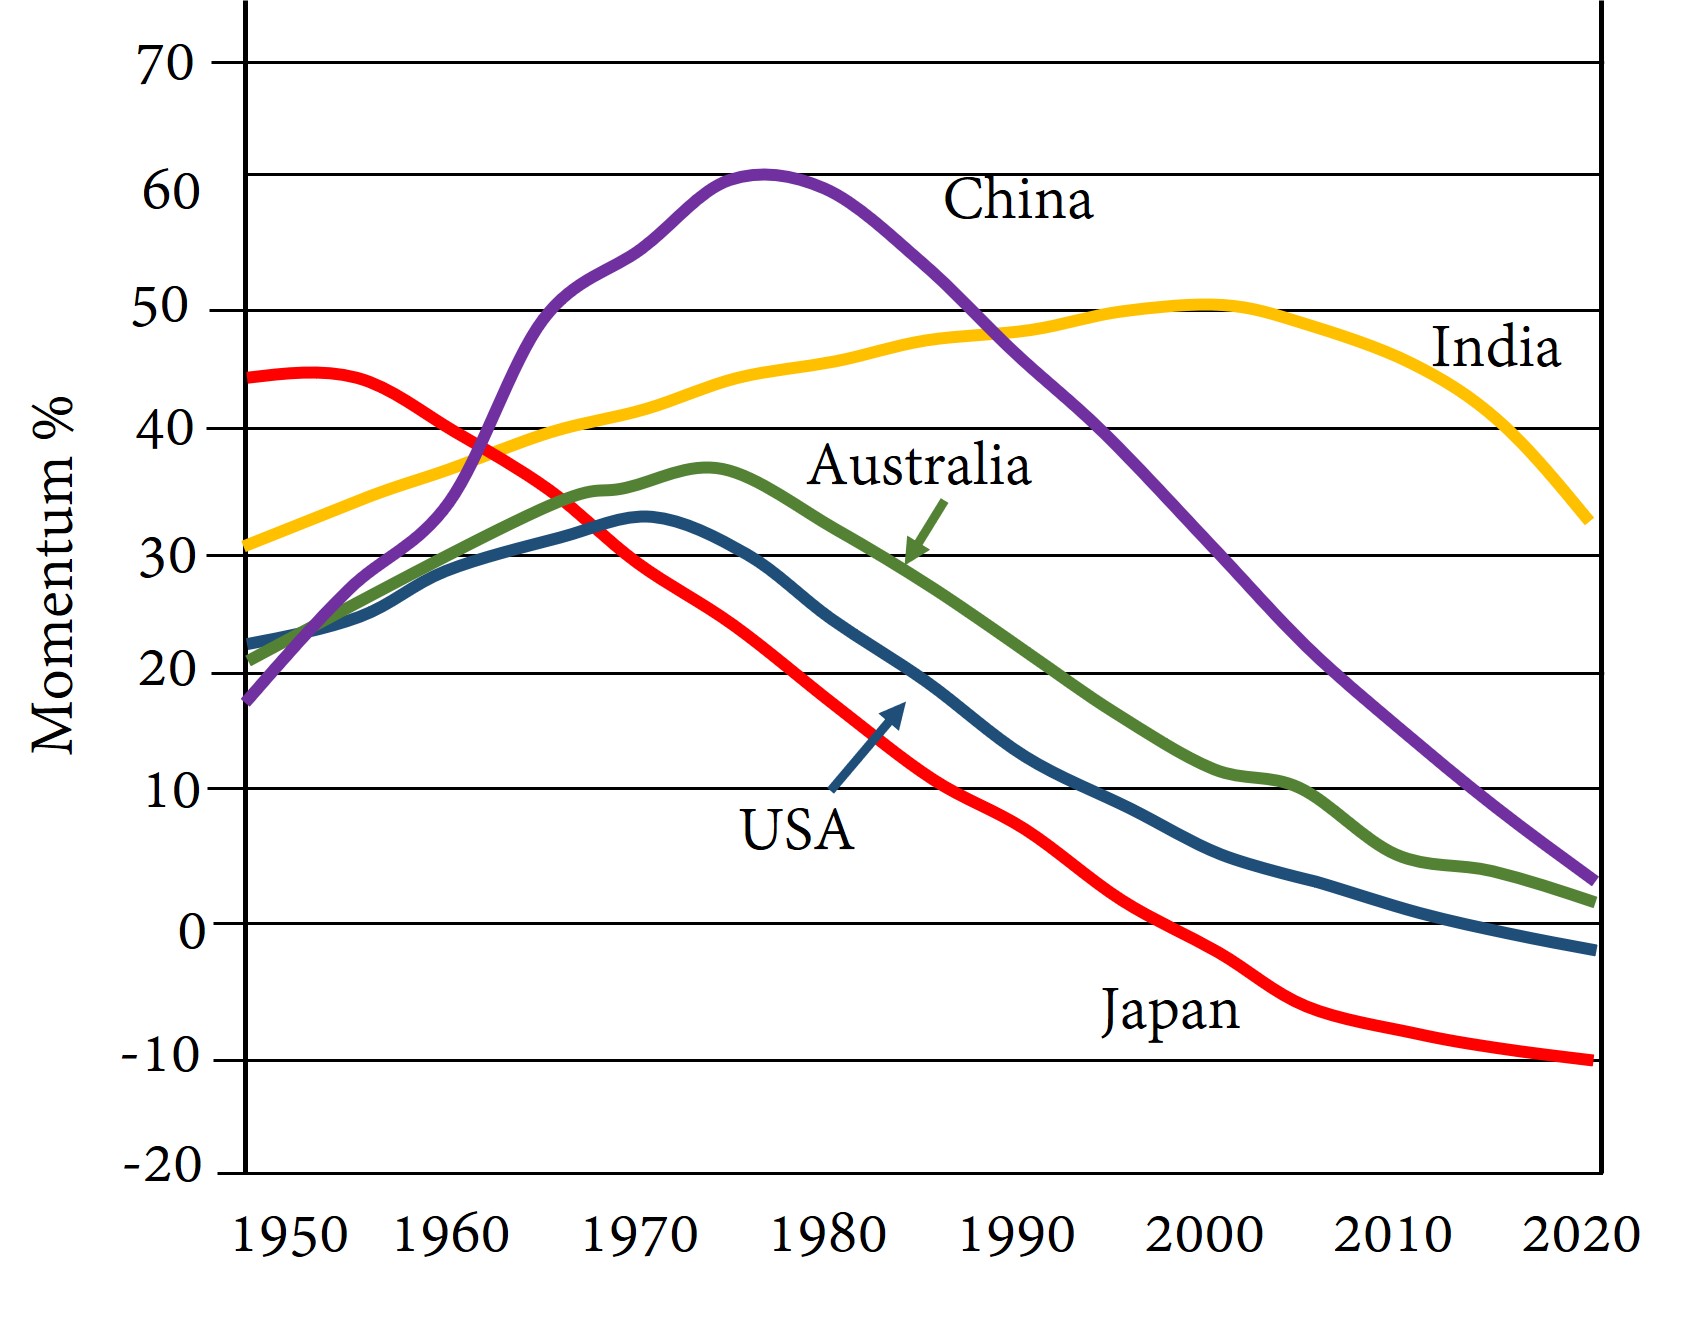 This graph shows population momentum over time for the Japan, the USA, Australia, China, and India. Japan's population momentum in 1950 was significant but it began to fall during the 1950s and by 1960 was less than the other countries'. Its momentum became negative in the 1990s. The USA's population momentum started out below Japan's and grew before beginning its decline in the 1970s. Its population momentum became negative after 2010. Australia's trajectory is similar to the USA's, but since the 1950s its population momentum has been higher than the USA's. India's population momentum in 1950 was intermediate between the United States' and Japan's, but grew until the early 2000s; it then began to decline, but in 2020 was still as high as it had been in 1950. China's population momentum was less than that of the other countries in 1950, but it grew the fastest, and by the mid 1960s was the highest of all the countries'. It reached a peak in the late 1970s, then declined steadily until 2020, where it was approaching zero momentum and seemed poised to turn negative.